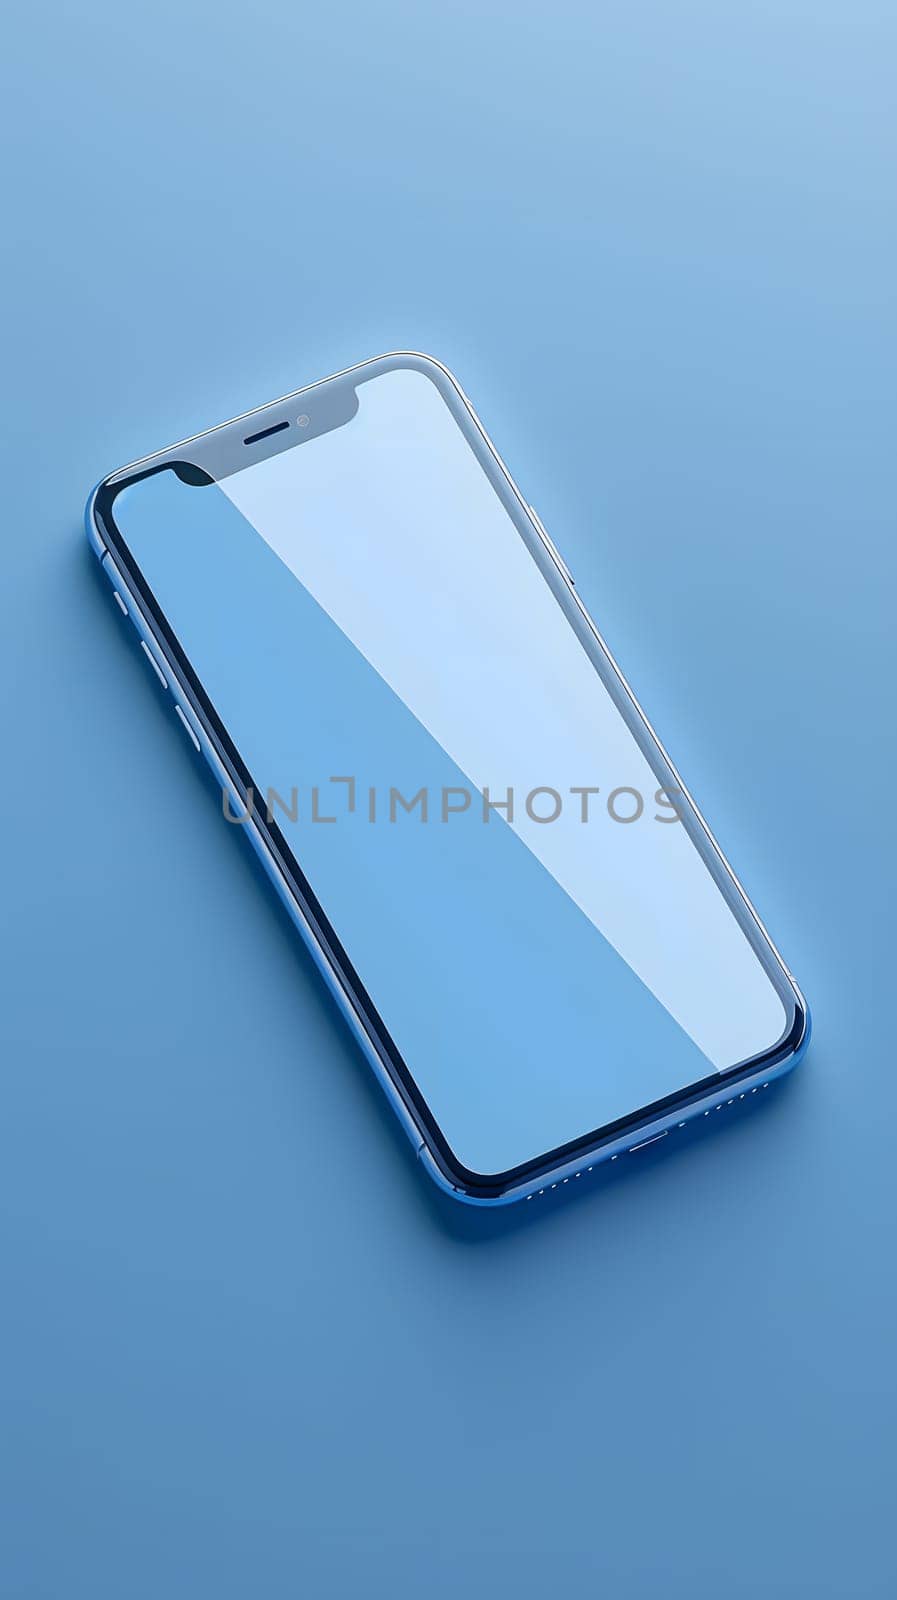 A portable communications device, in the form of a rectangular electric blue smartphone, is resting on a blue plastic surface. It is equipped with a bumper for protection